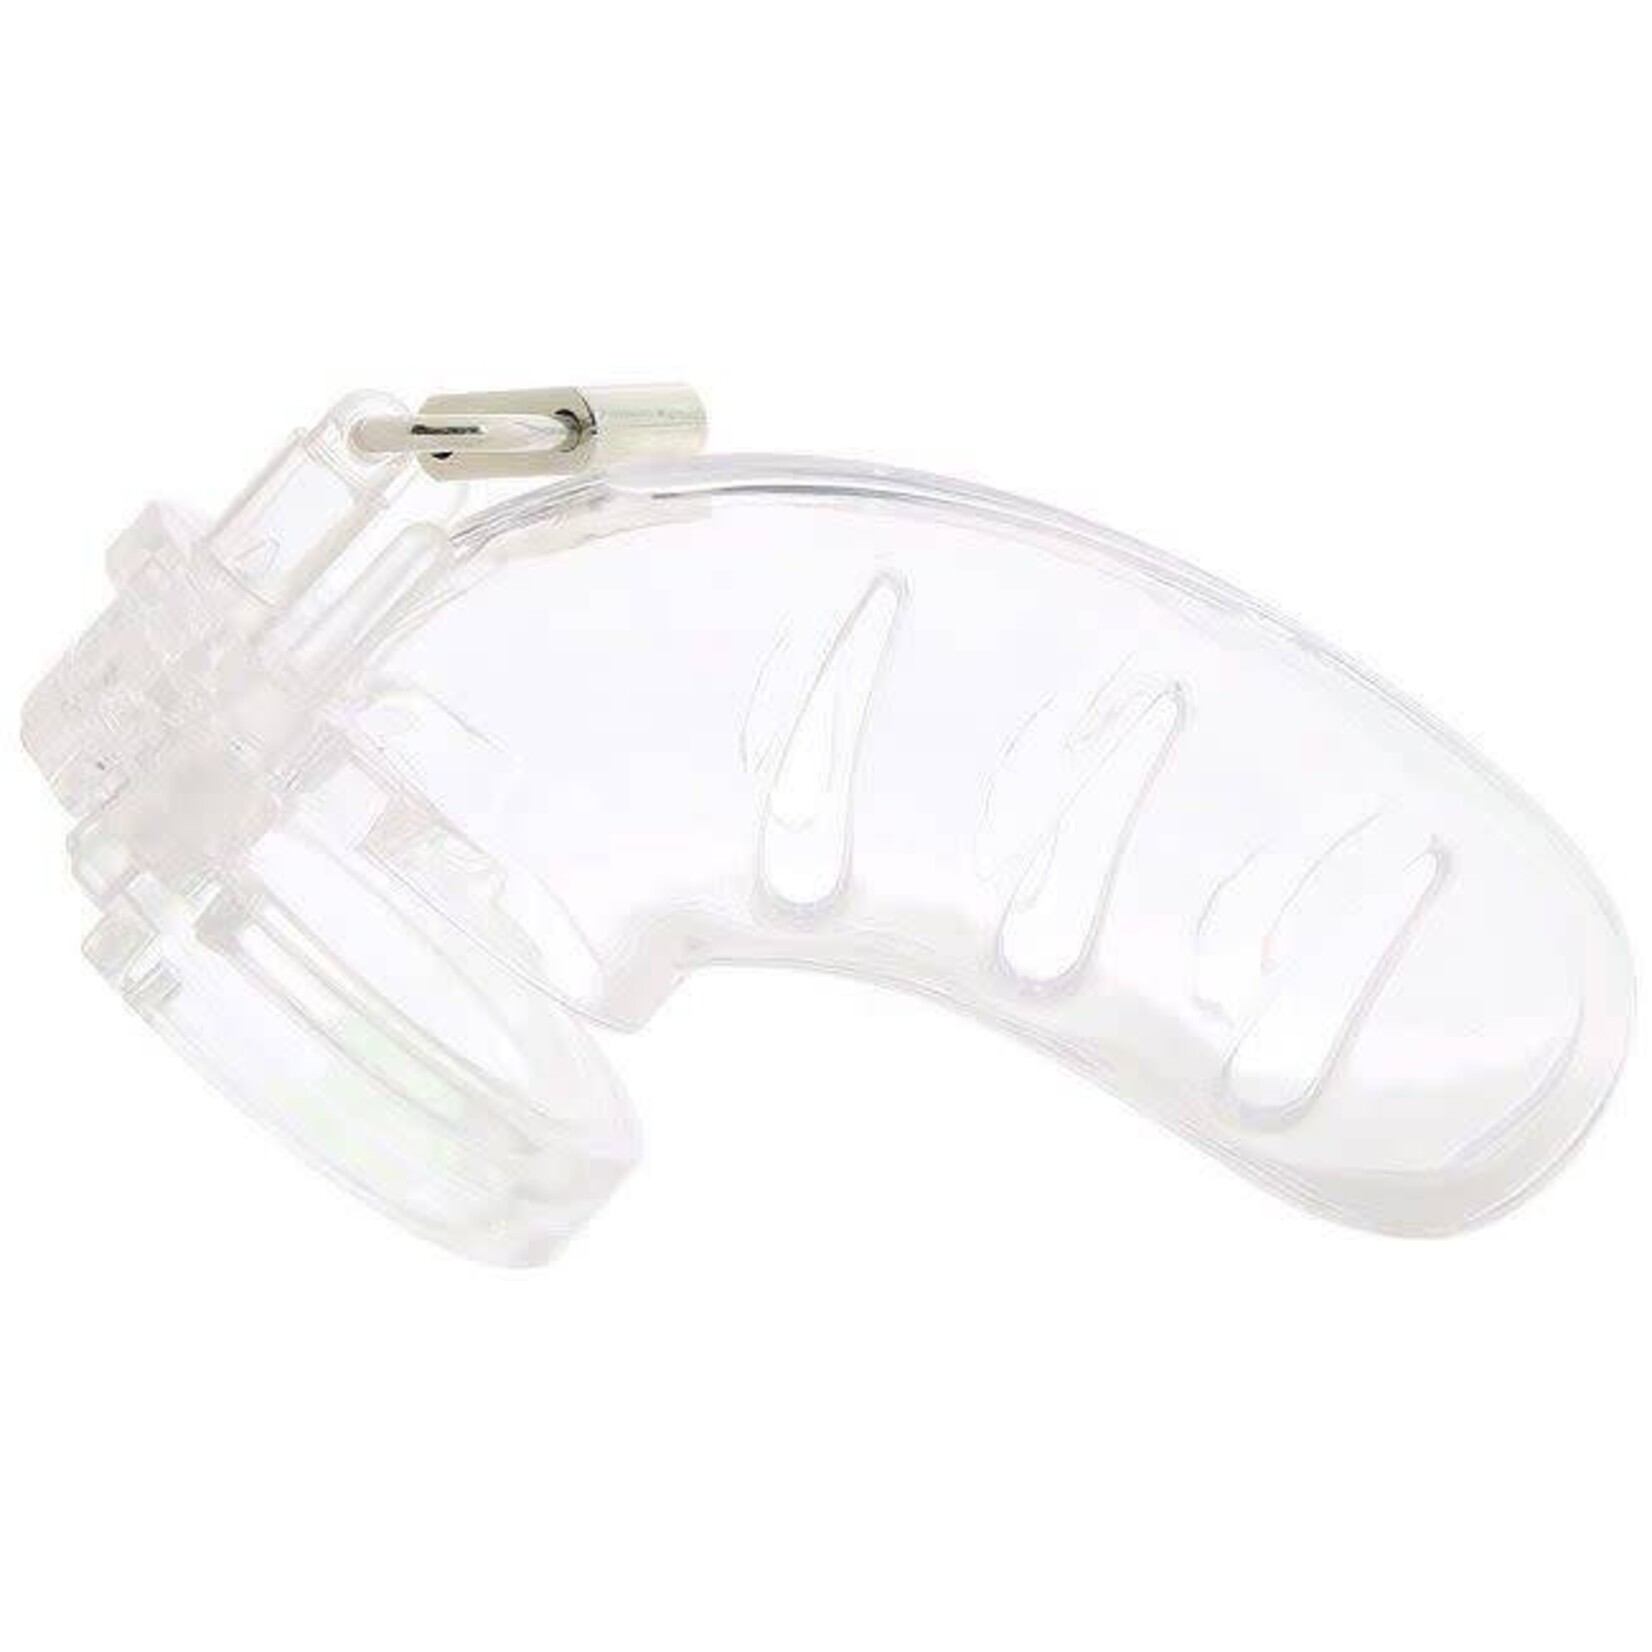 Shots America Man|Cage 03 4.5" Chastity Device